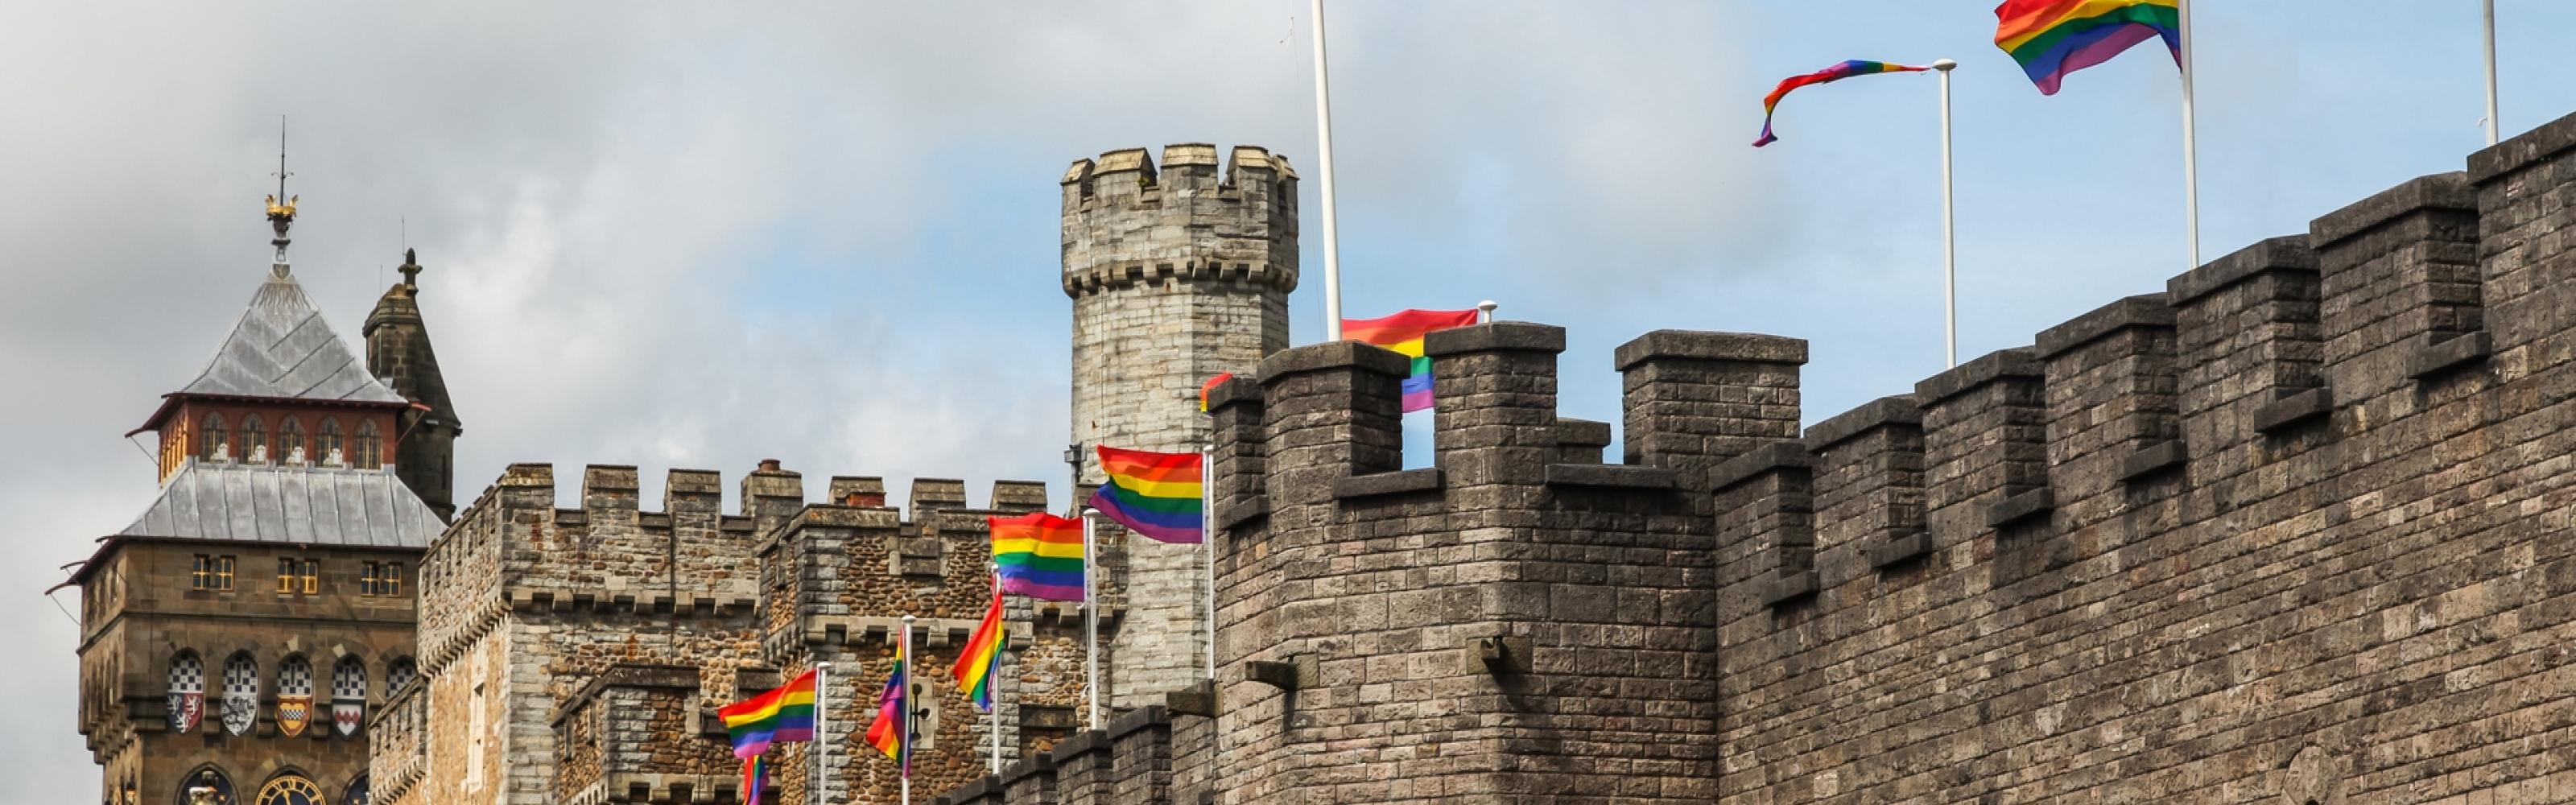 LGBT+ places in the city of Cardiff South Wales Visit Wales